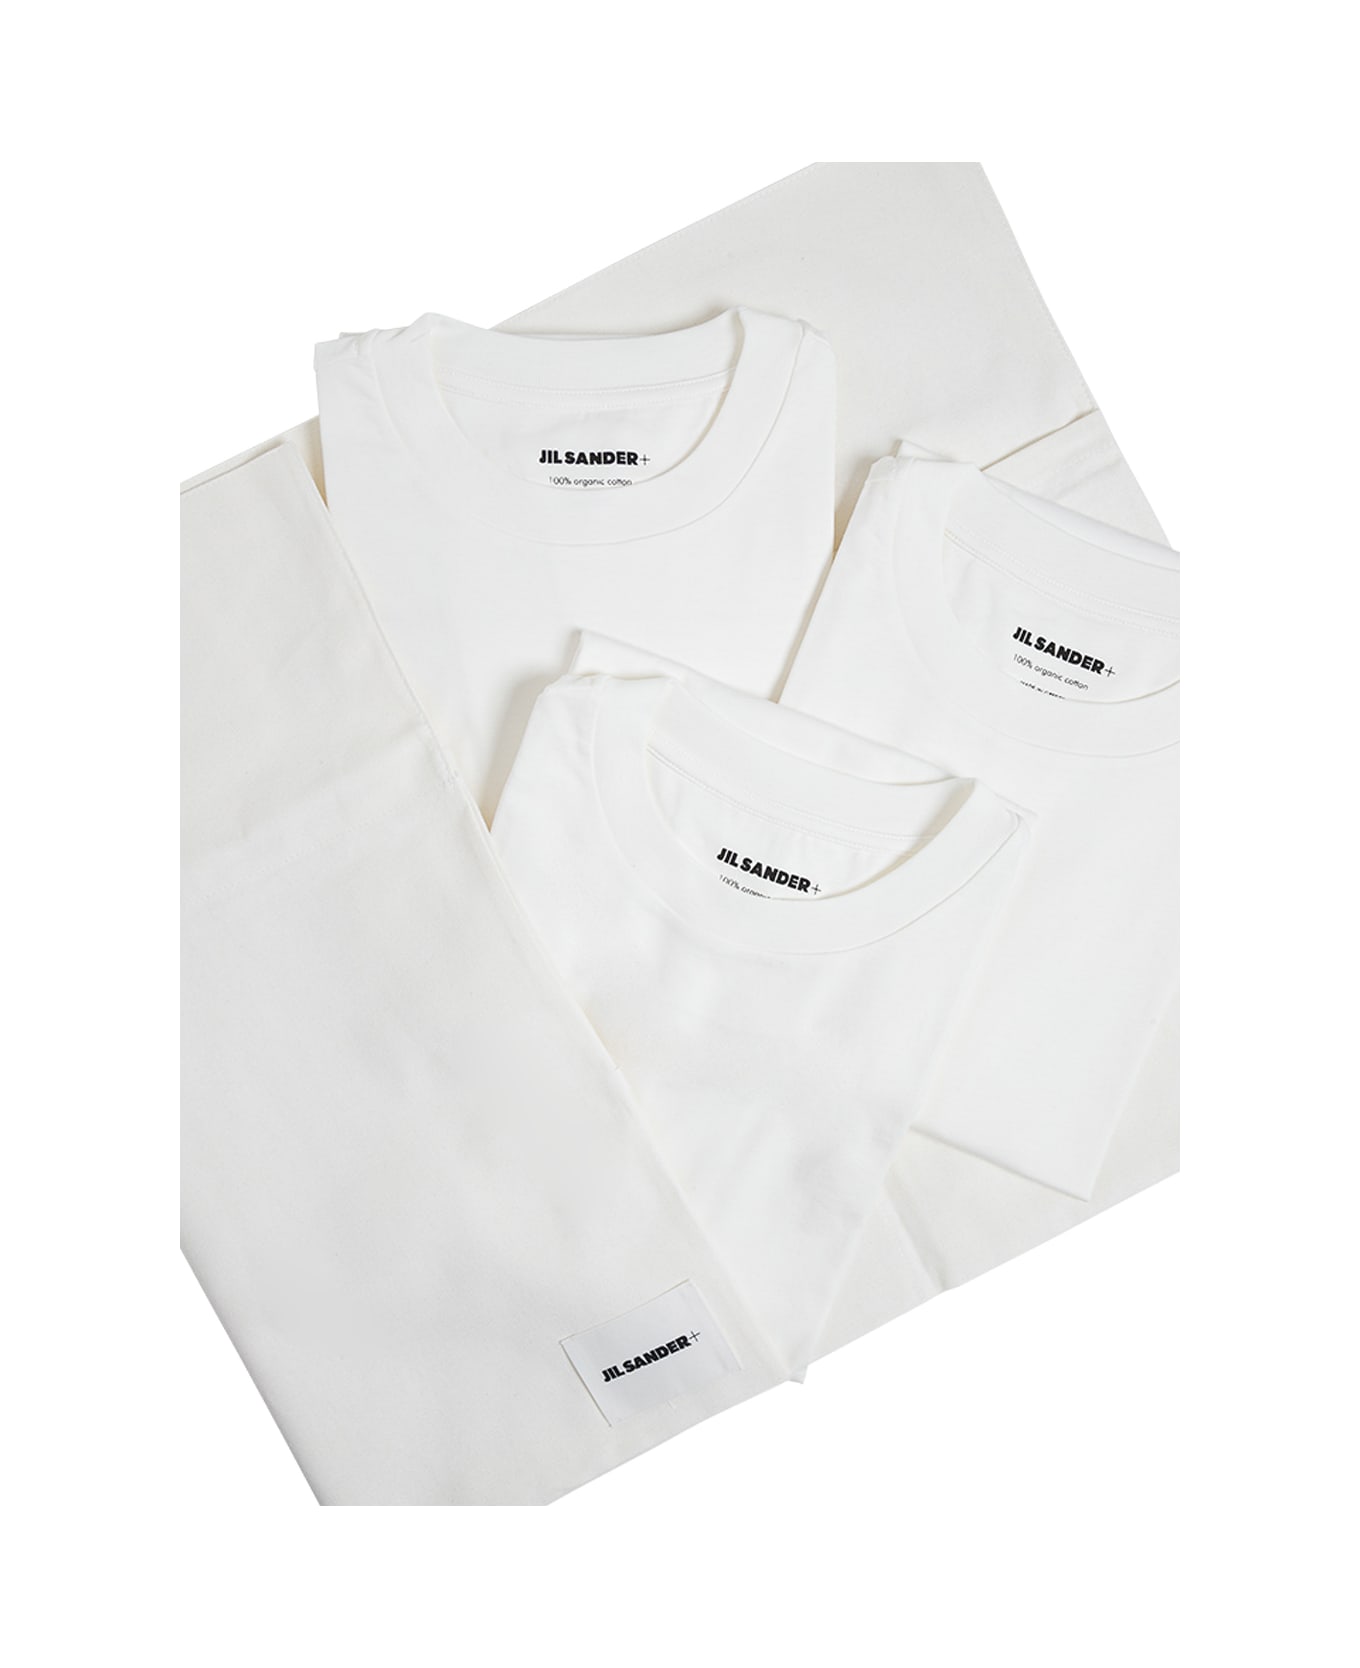 Jil Sander White T-shirt Three-pack In Cotton With Logo Patch At The Bottom Man - White